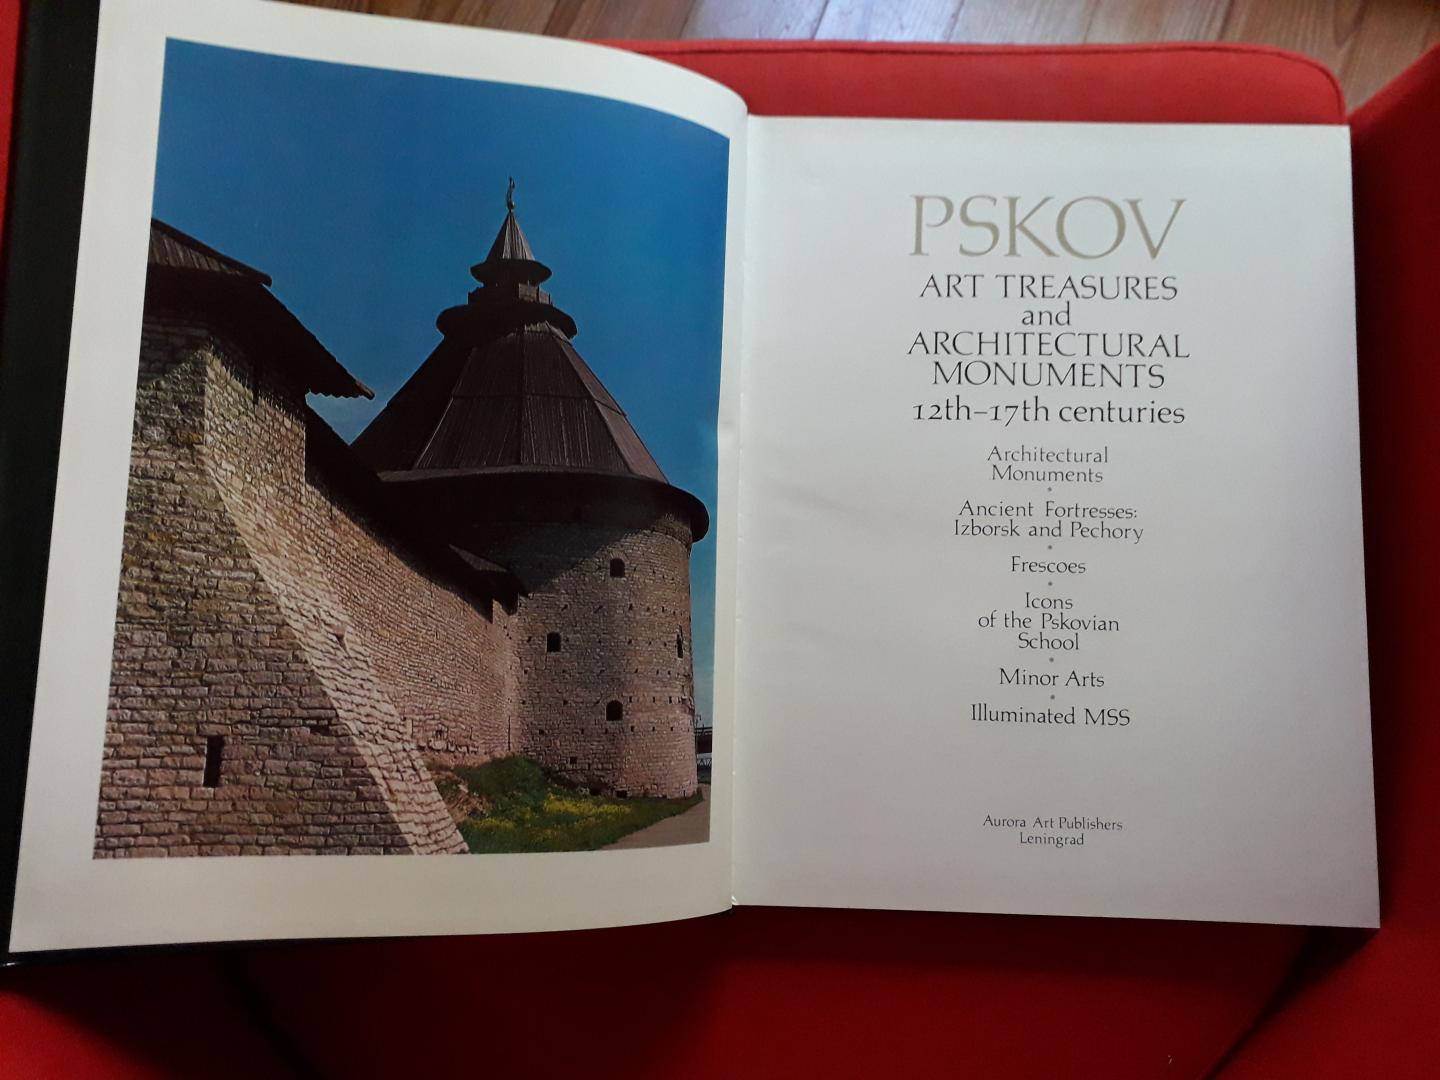 Yamshchikov, Savely red. - PSKOV - Art Treasures and Architectural Monuments 12th-17th centuries